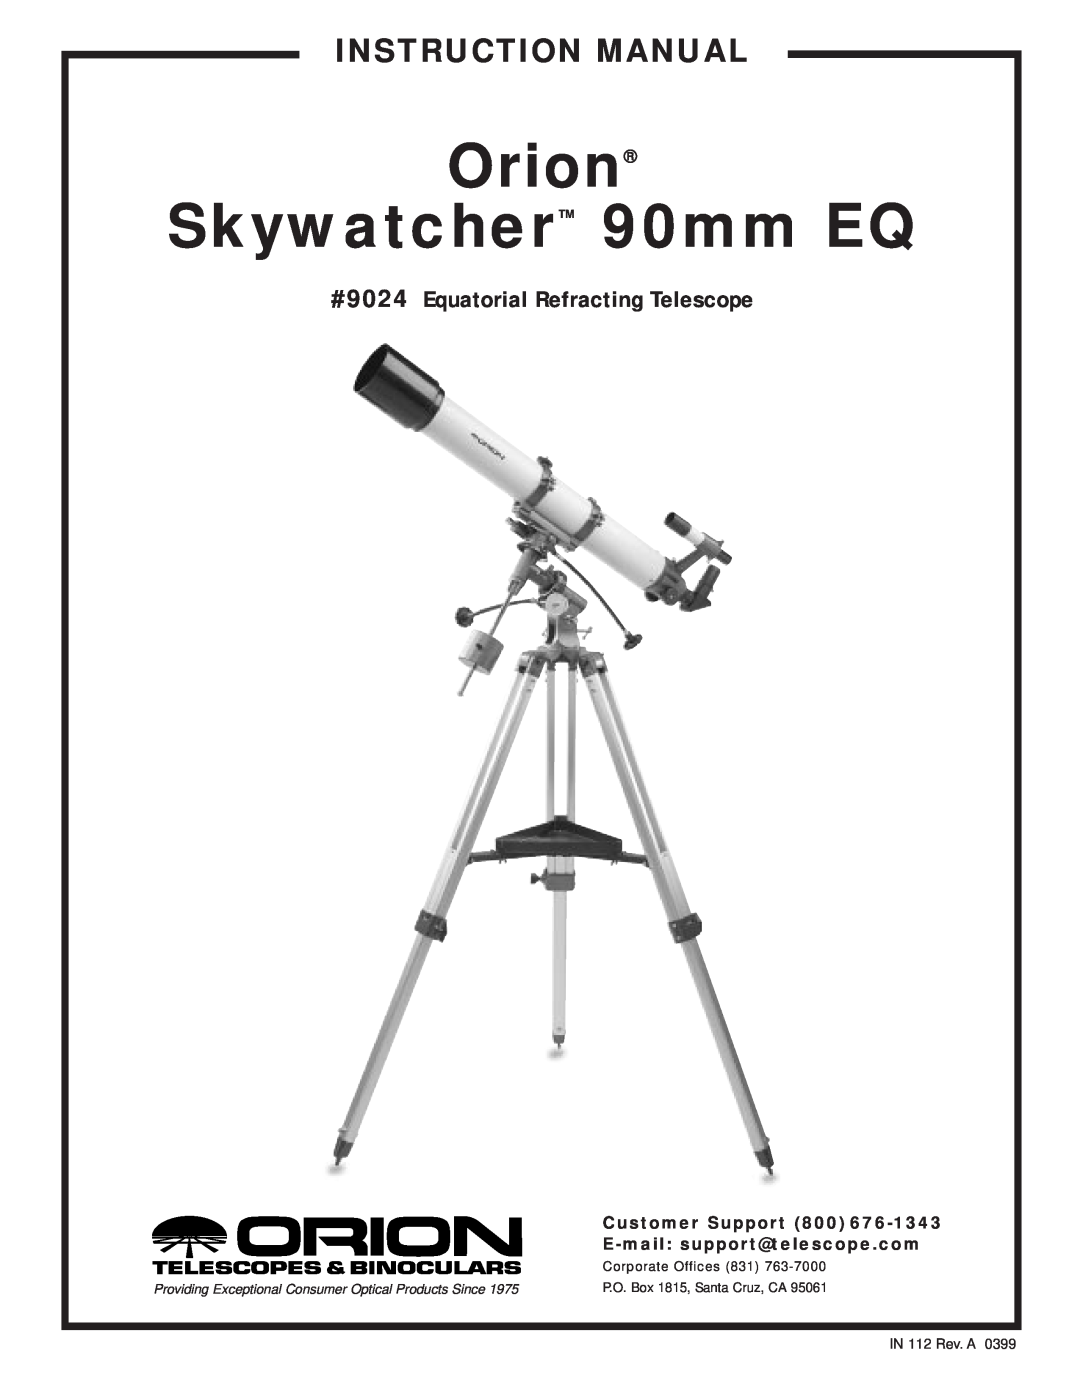 Orion 9086, 9025 instruction manual Orion, Skywatcher, 90mm EQ, Instruction Manual, #9024 Equatorial Refracting Telescope 